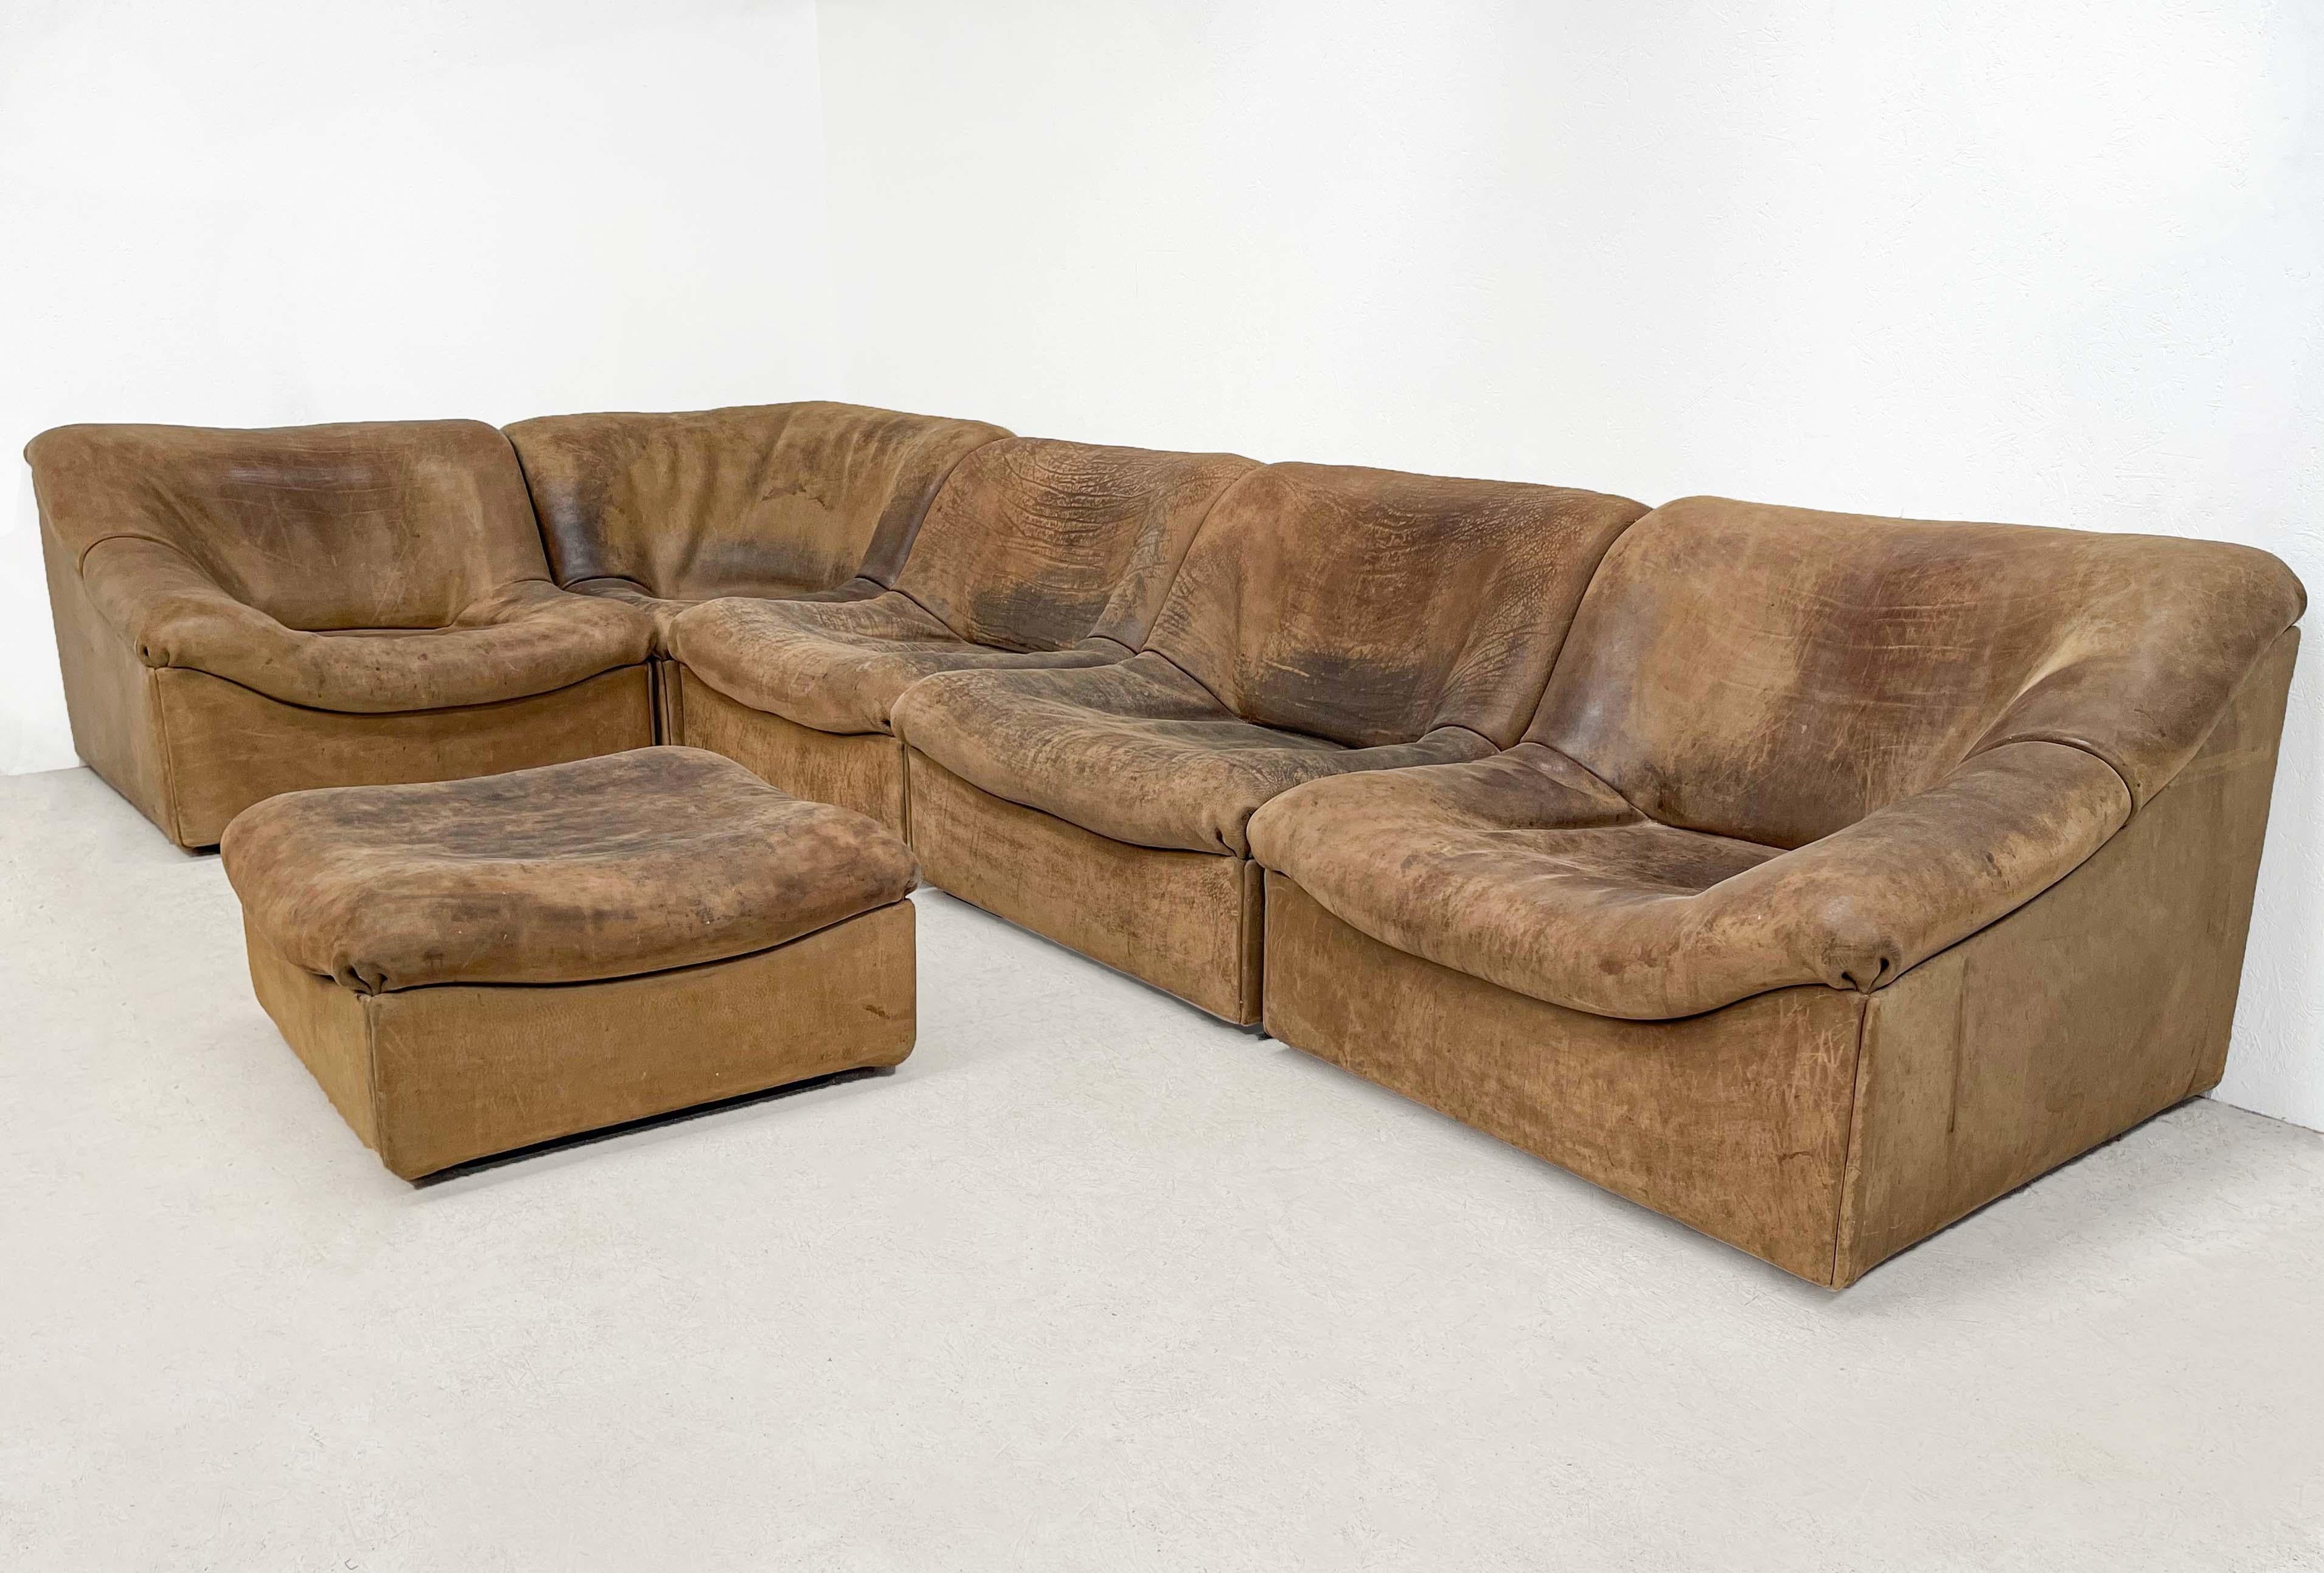 European Mid-Century Modern Brown Leather DS46 Sectional Sofa by De Sede